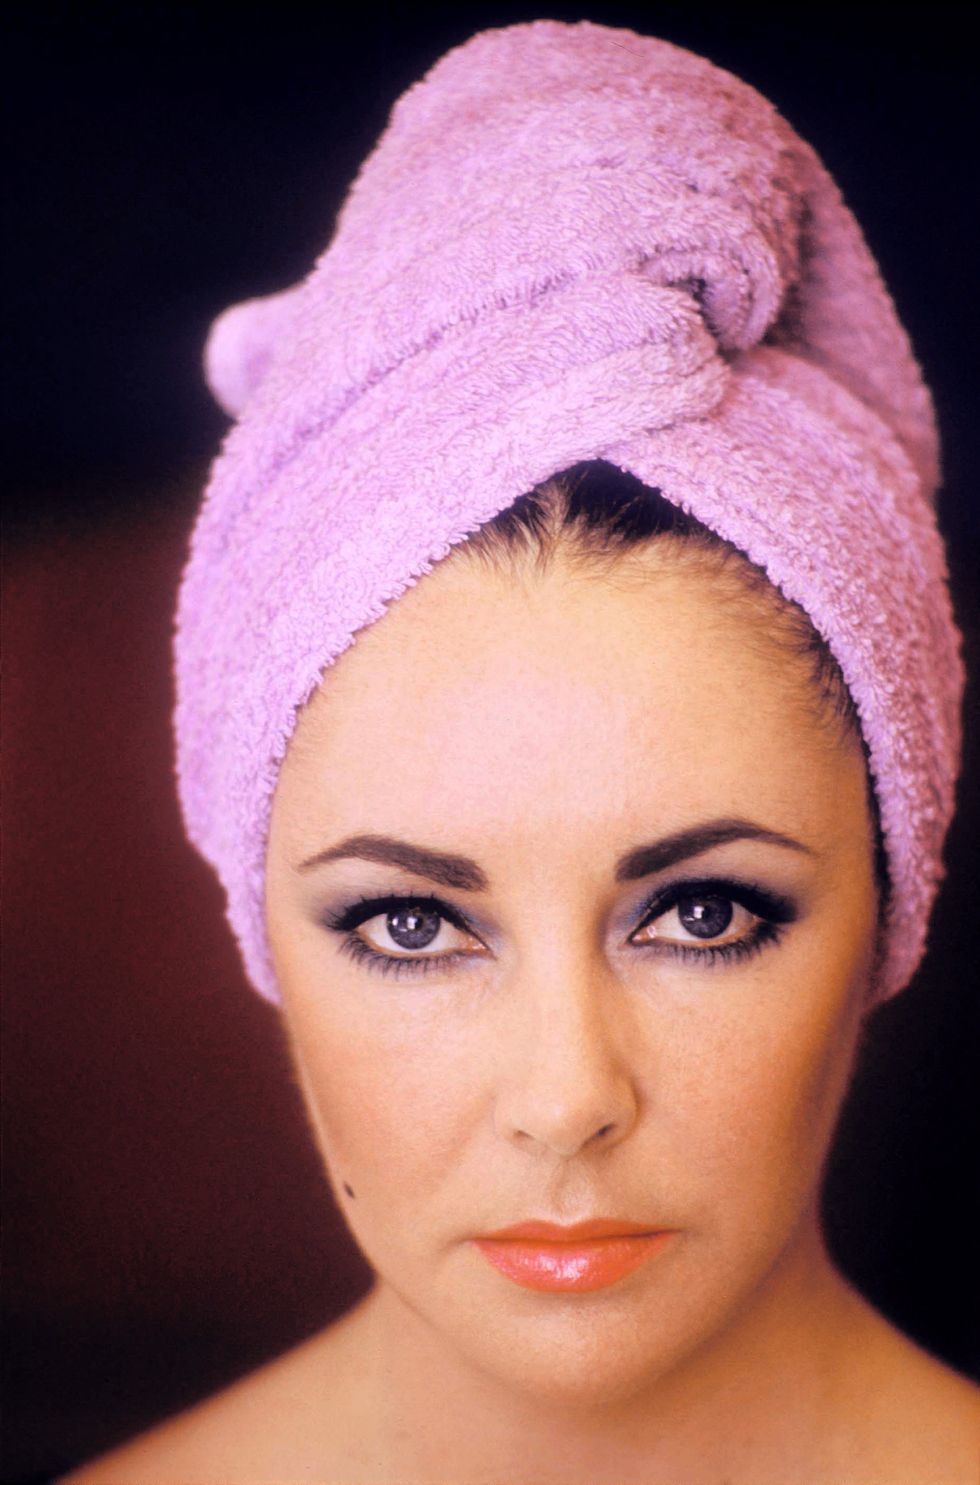 383956 01 actress elizabeth taylor poses in usa, mid 1960s a childhood star after her appearance in national velvet at twelve, taylor would later win best actress oscars for butterfield 8 and whos afraid of virginia woolf  photo by getty images